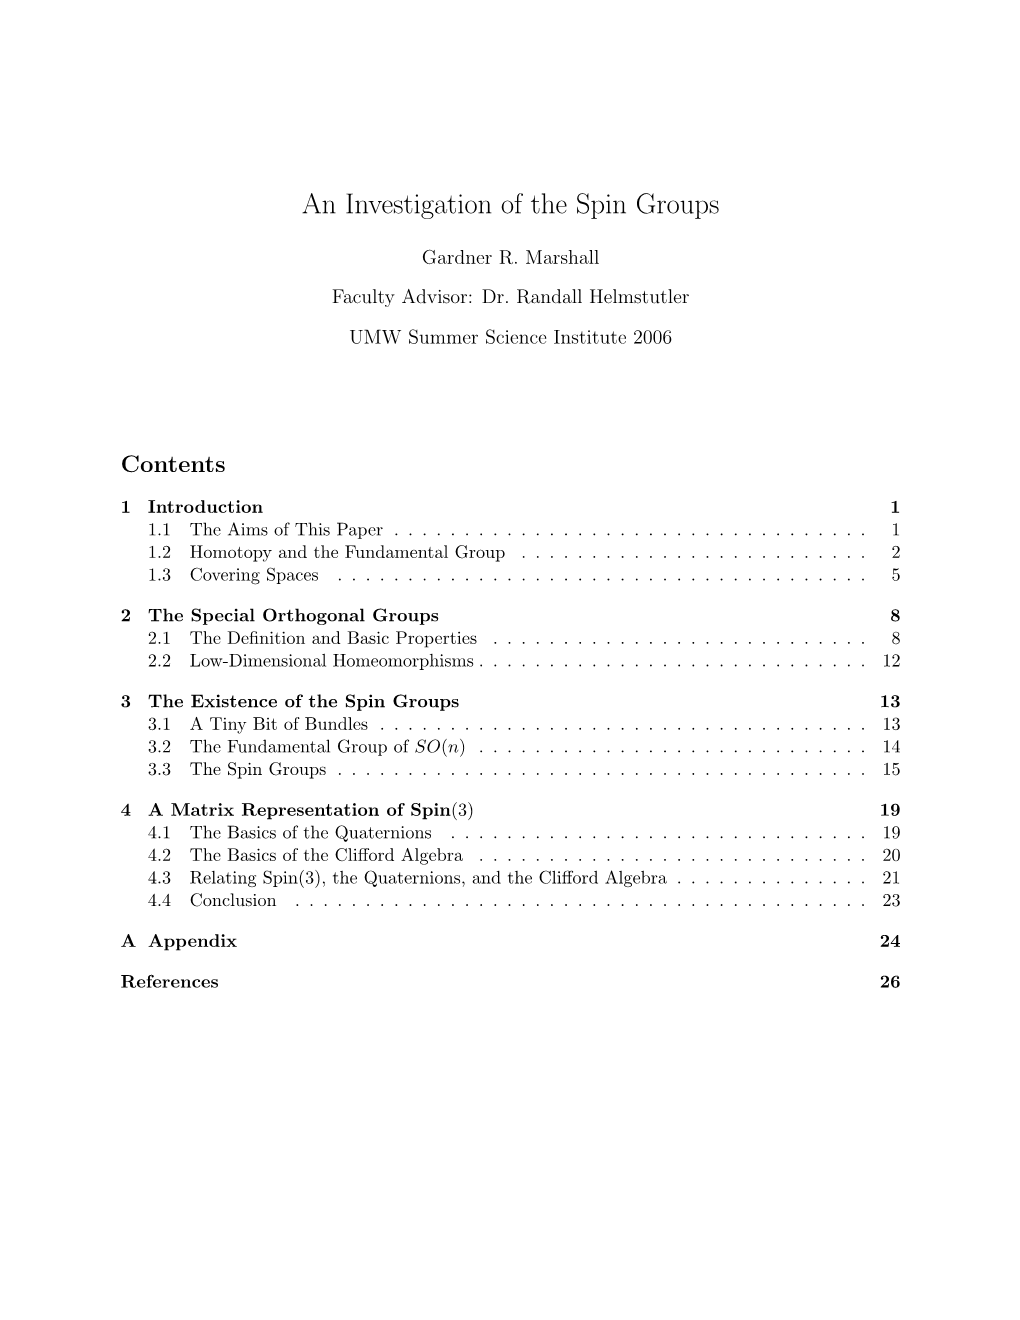 An Investigation of the Spin Groups